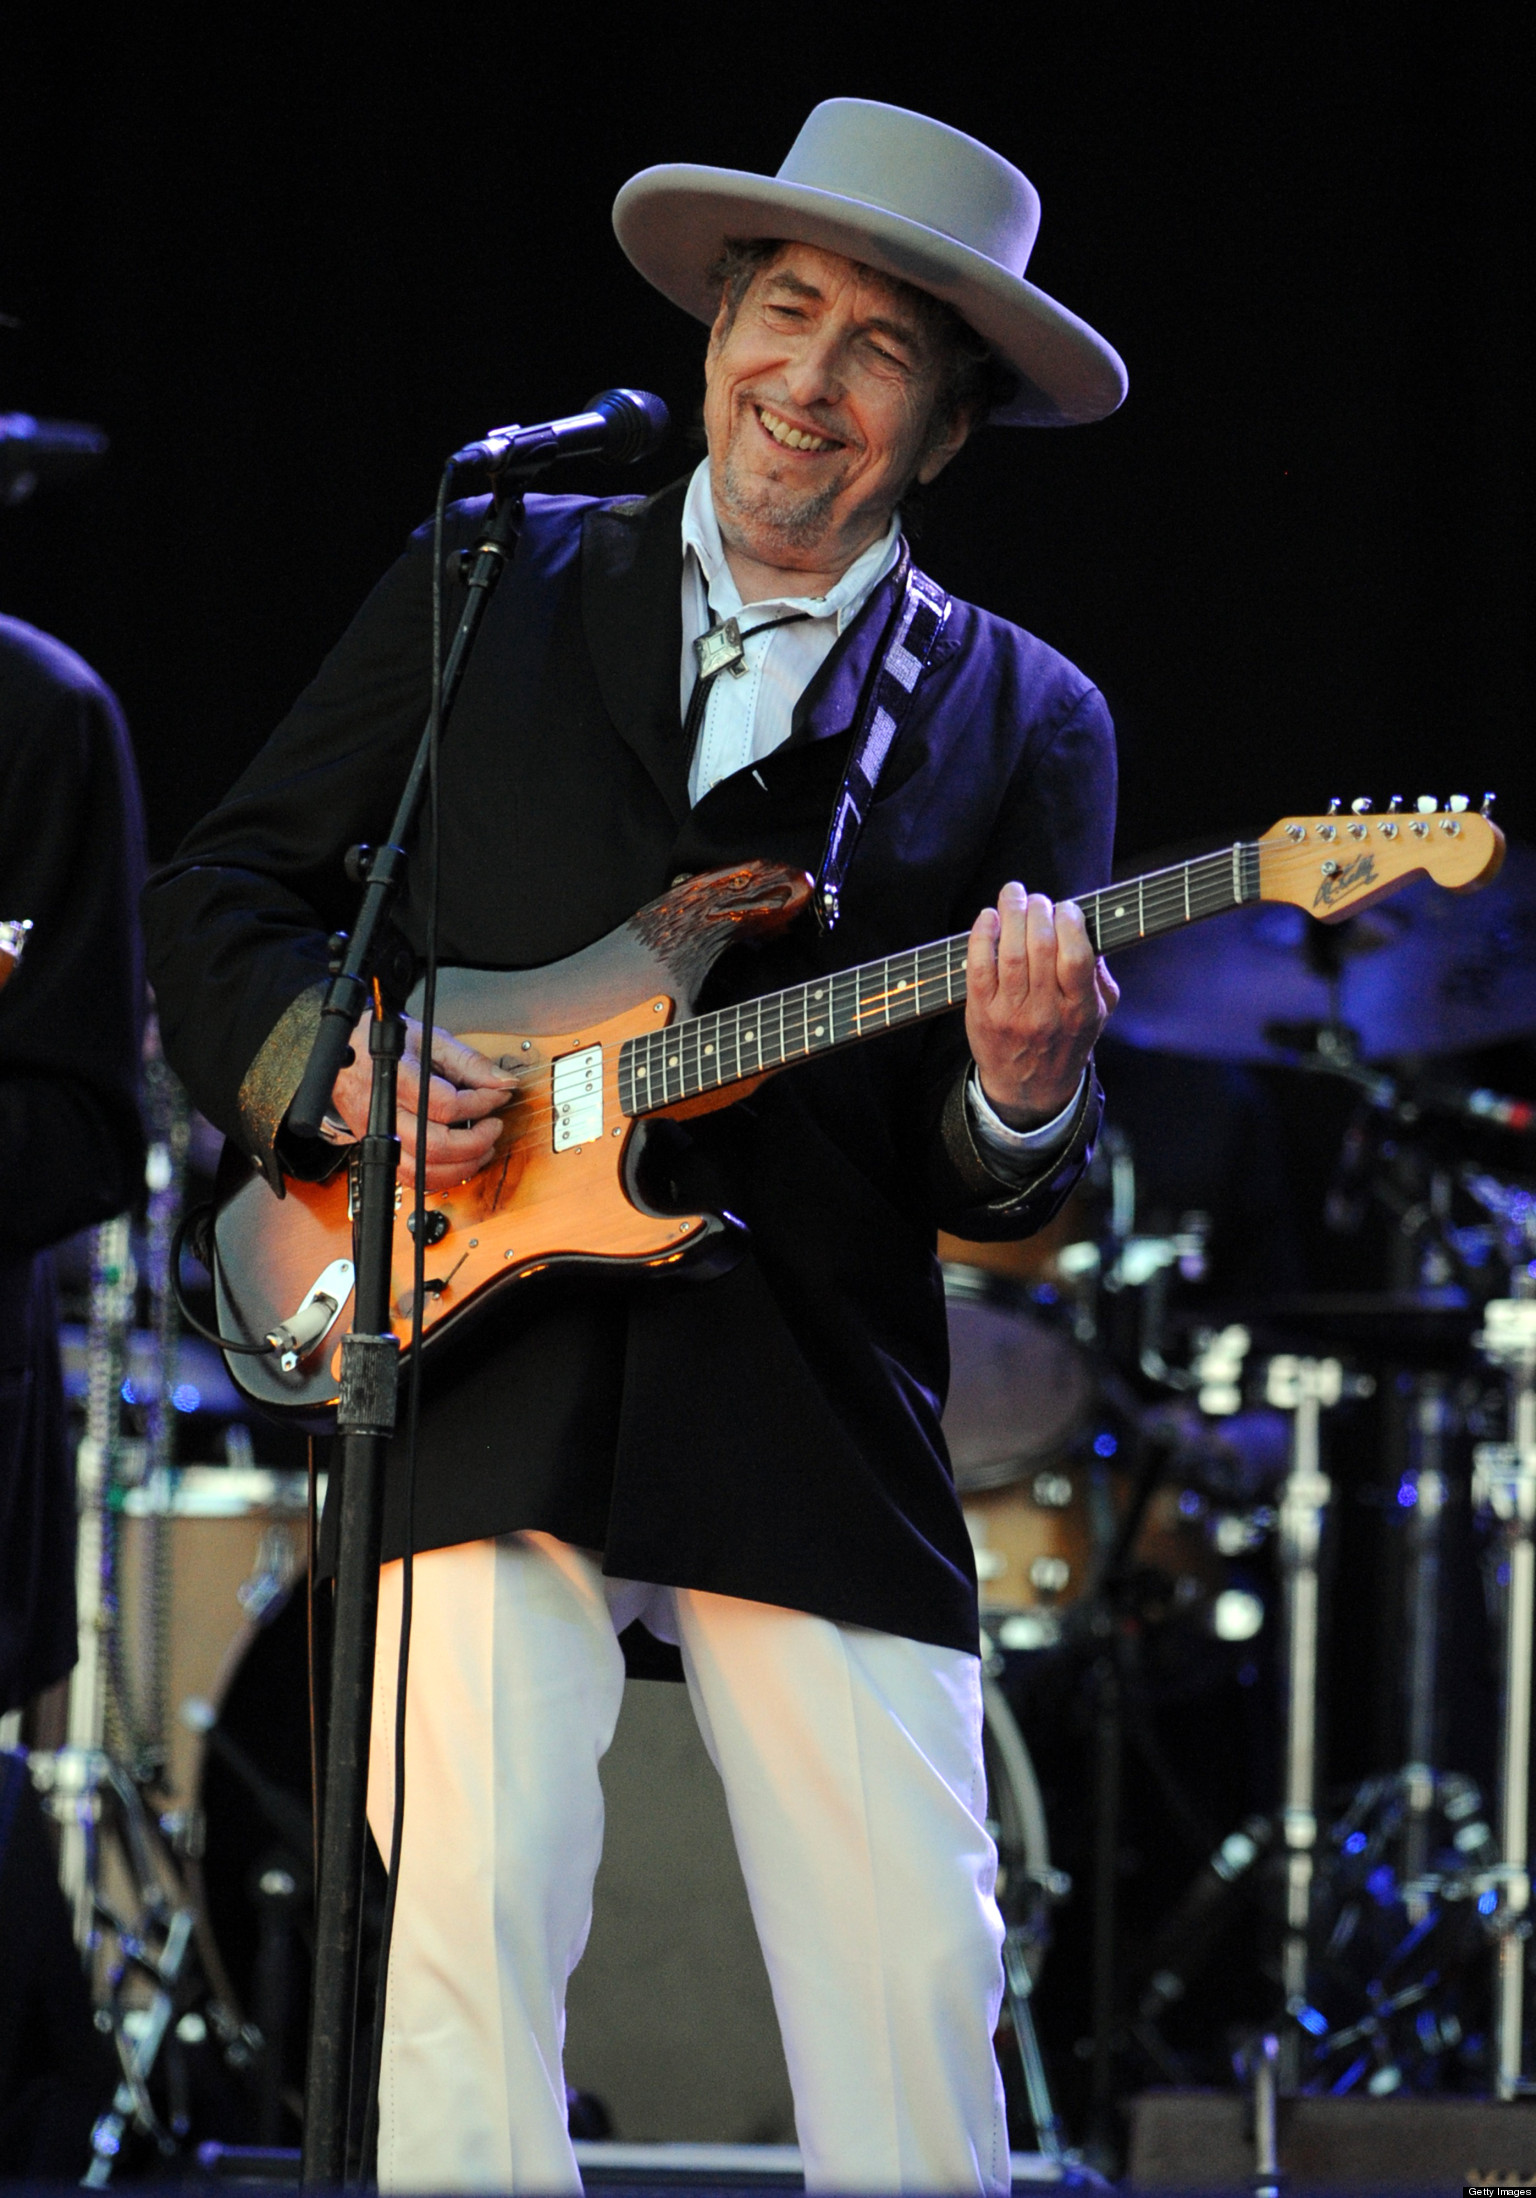 Bob Dylan Tour, AmericanaramA Festival Of Music, To Include Wilco, My Morning Jacket1536 x 2198